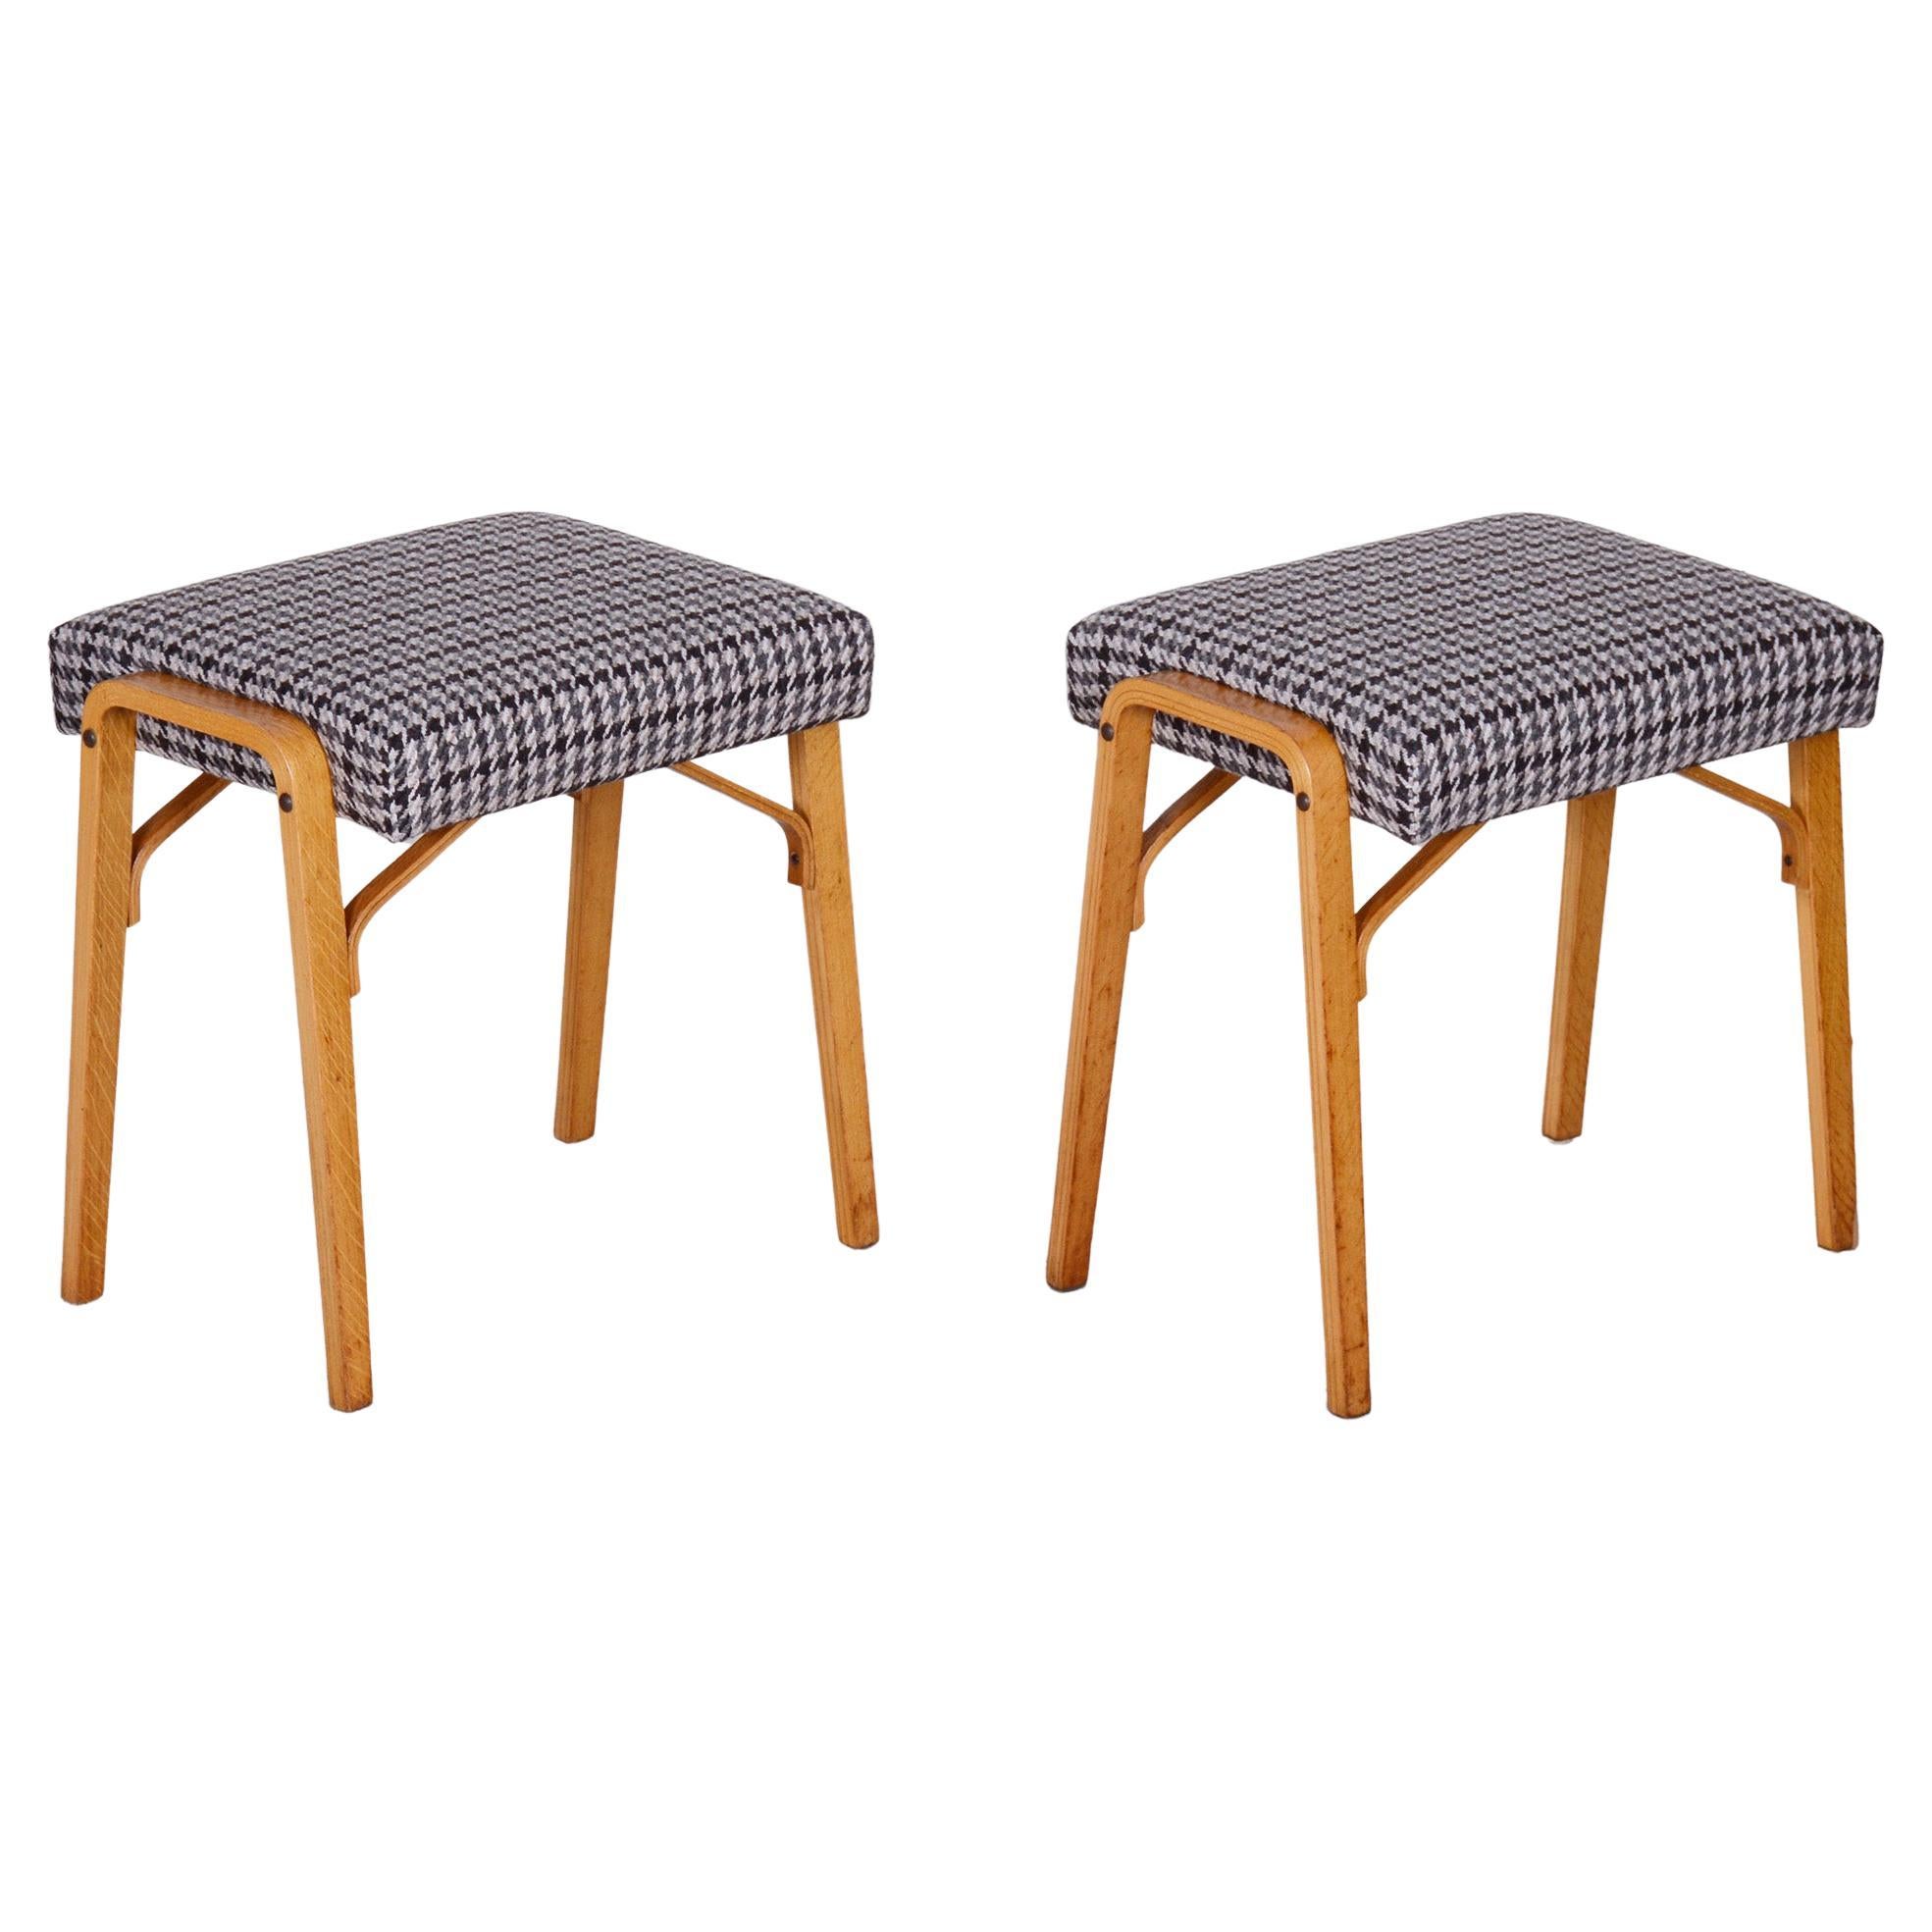 Pair of Midcentury Beech Stools by Ludvik Volak, Czechia, 1950s For Sale